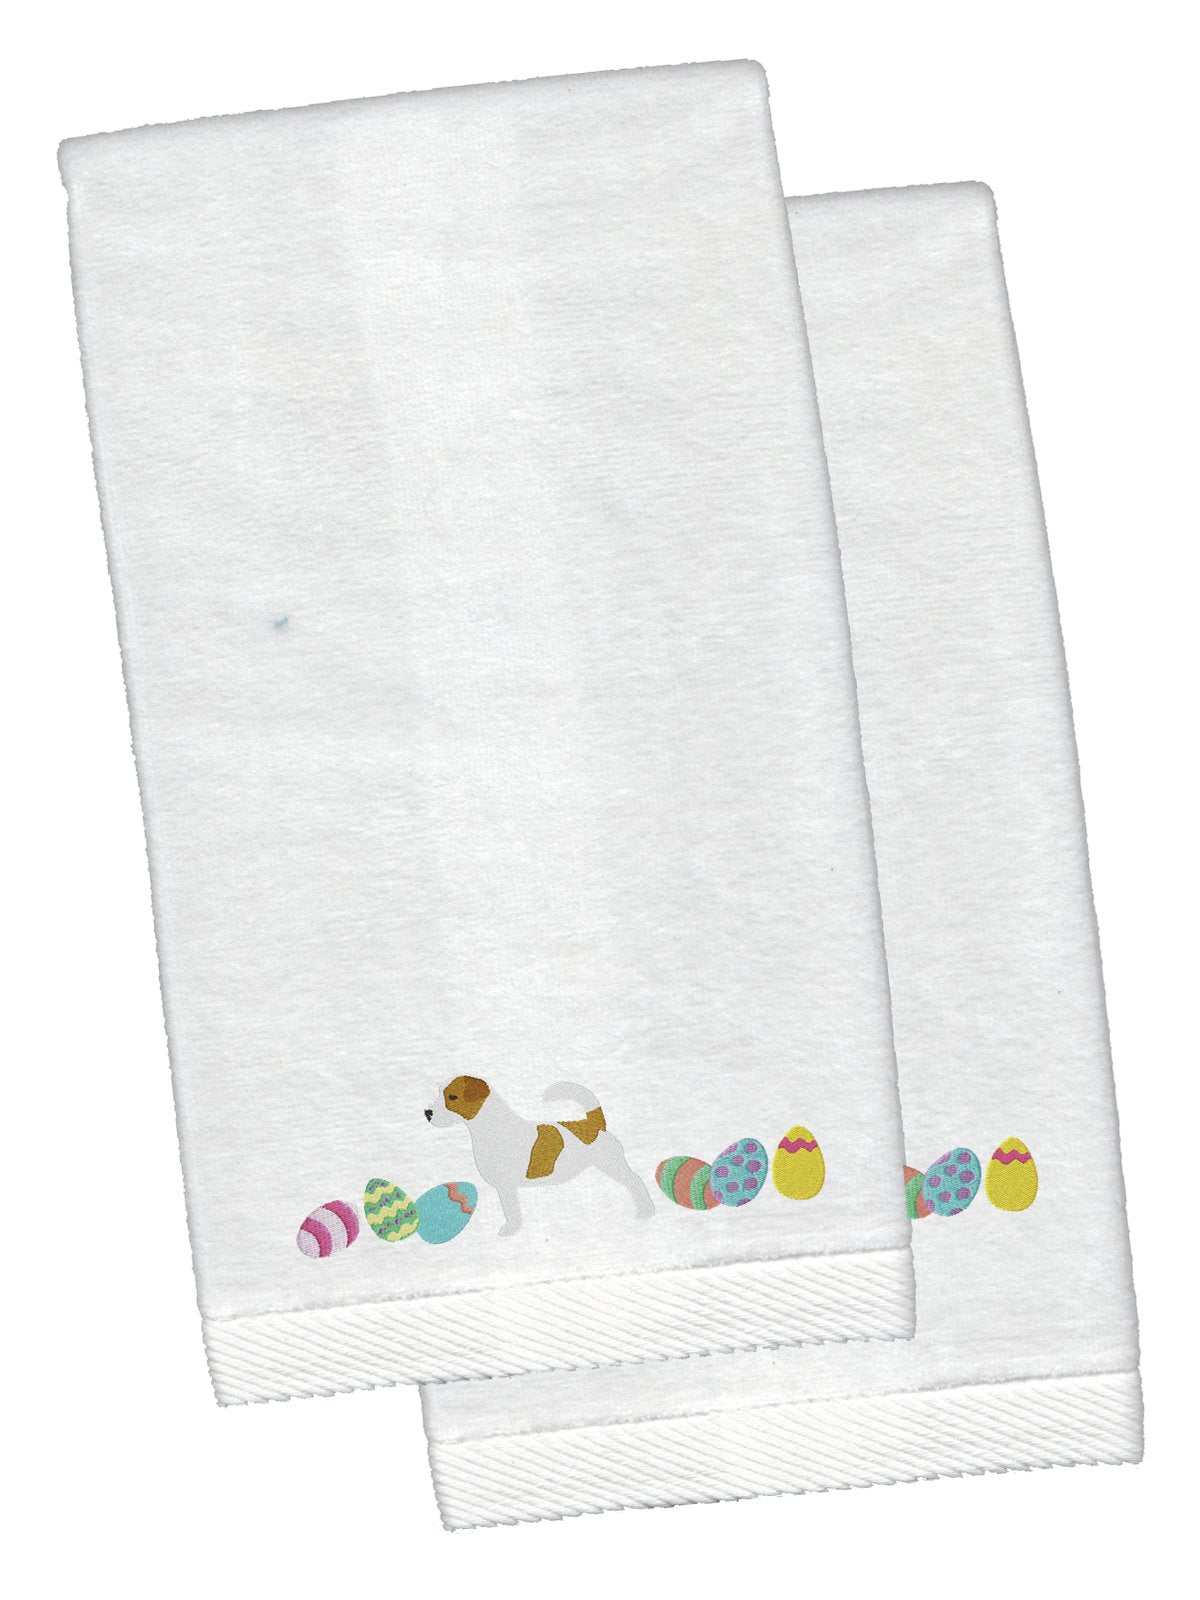 Jack Russell Terrier Easter White Embroidered Plush Hand Towel Set of 2 CK1657KTEMB by Caroline's Treasures